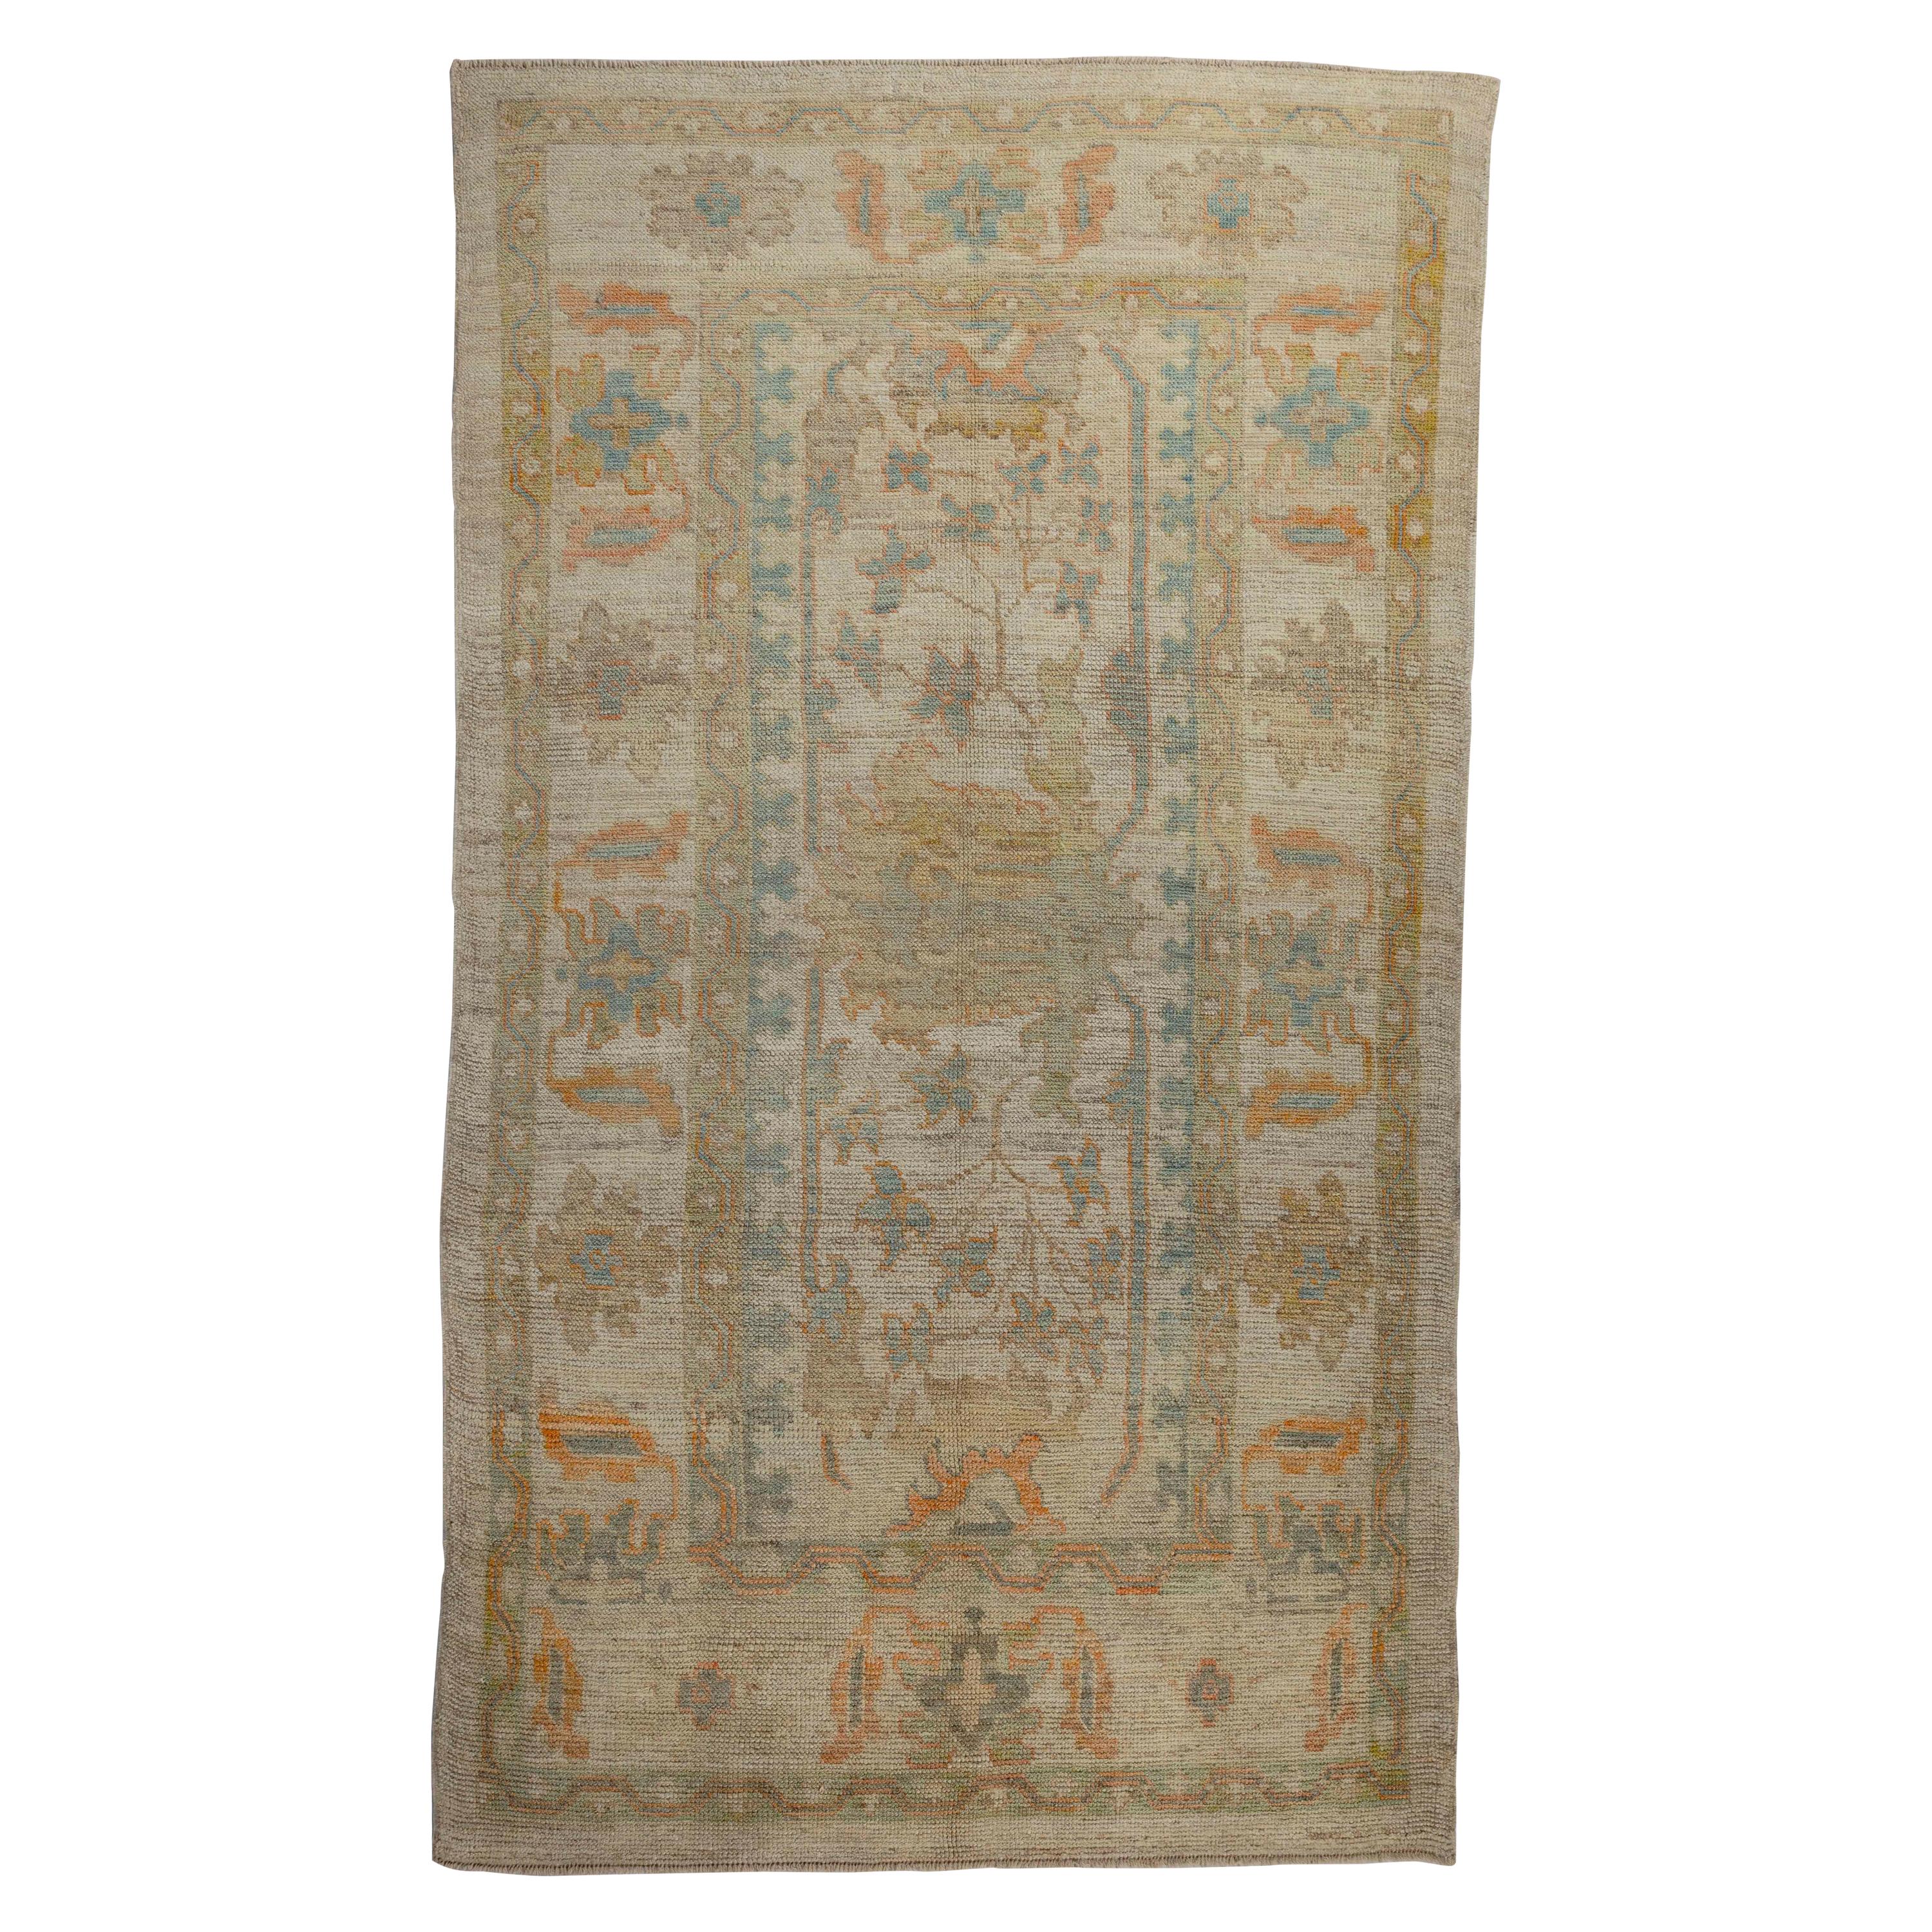 Contemporary Turkish Oushak Rug with Large Flower Head on Center Field